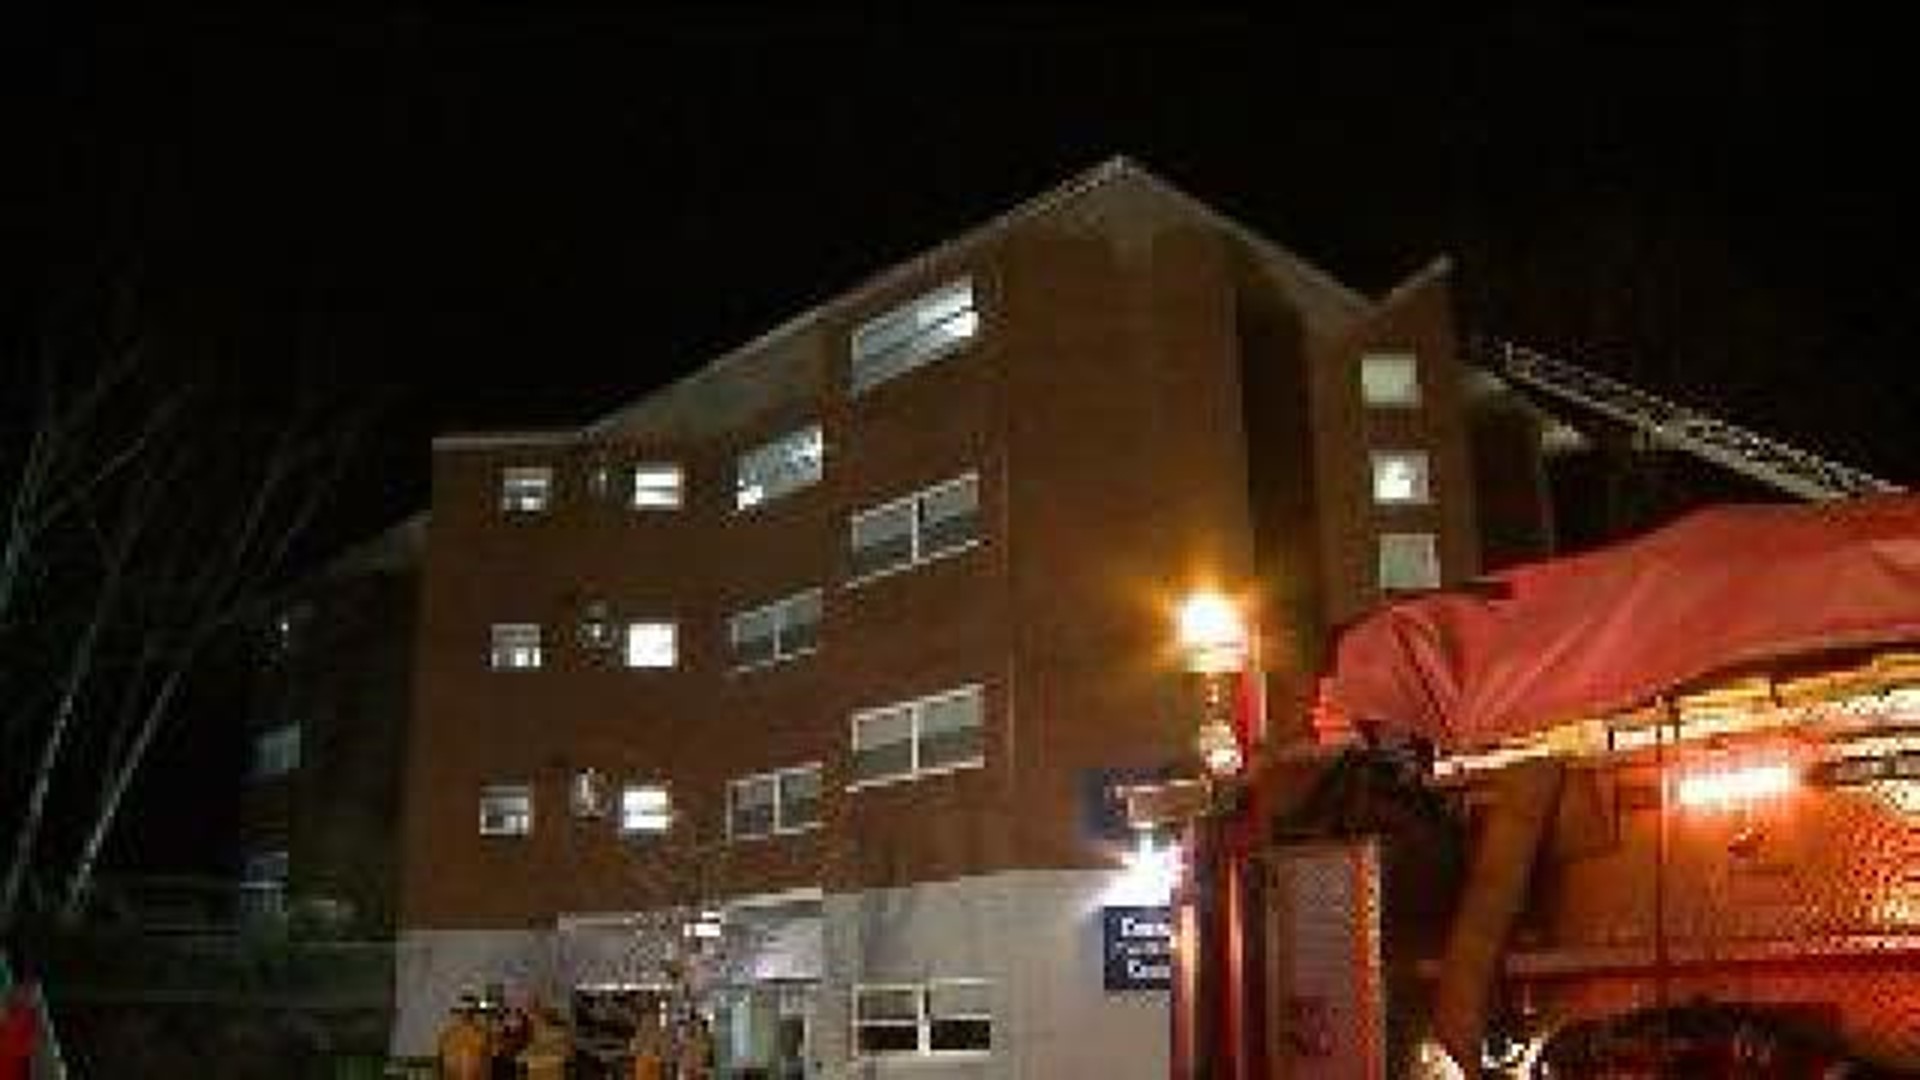 Students Move To Temporary Housing After Fire